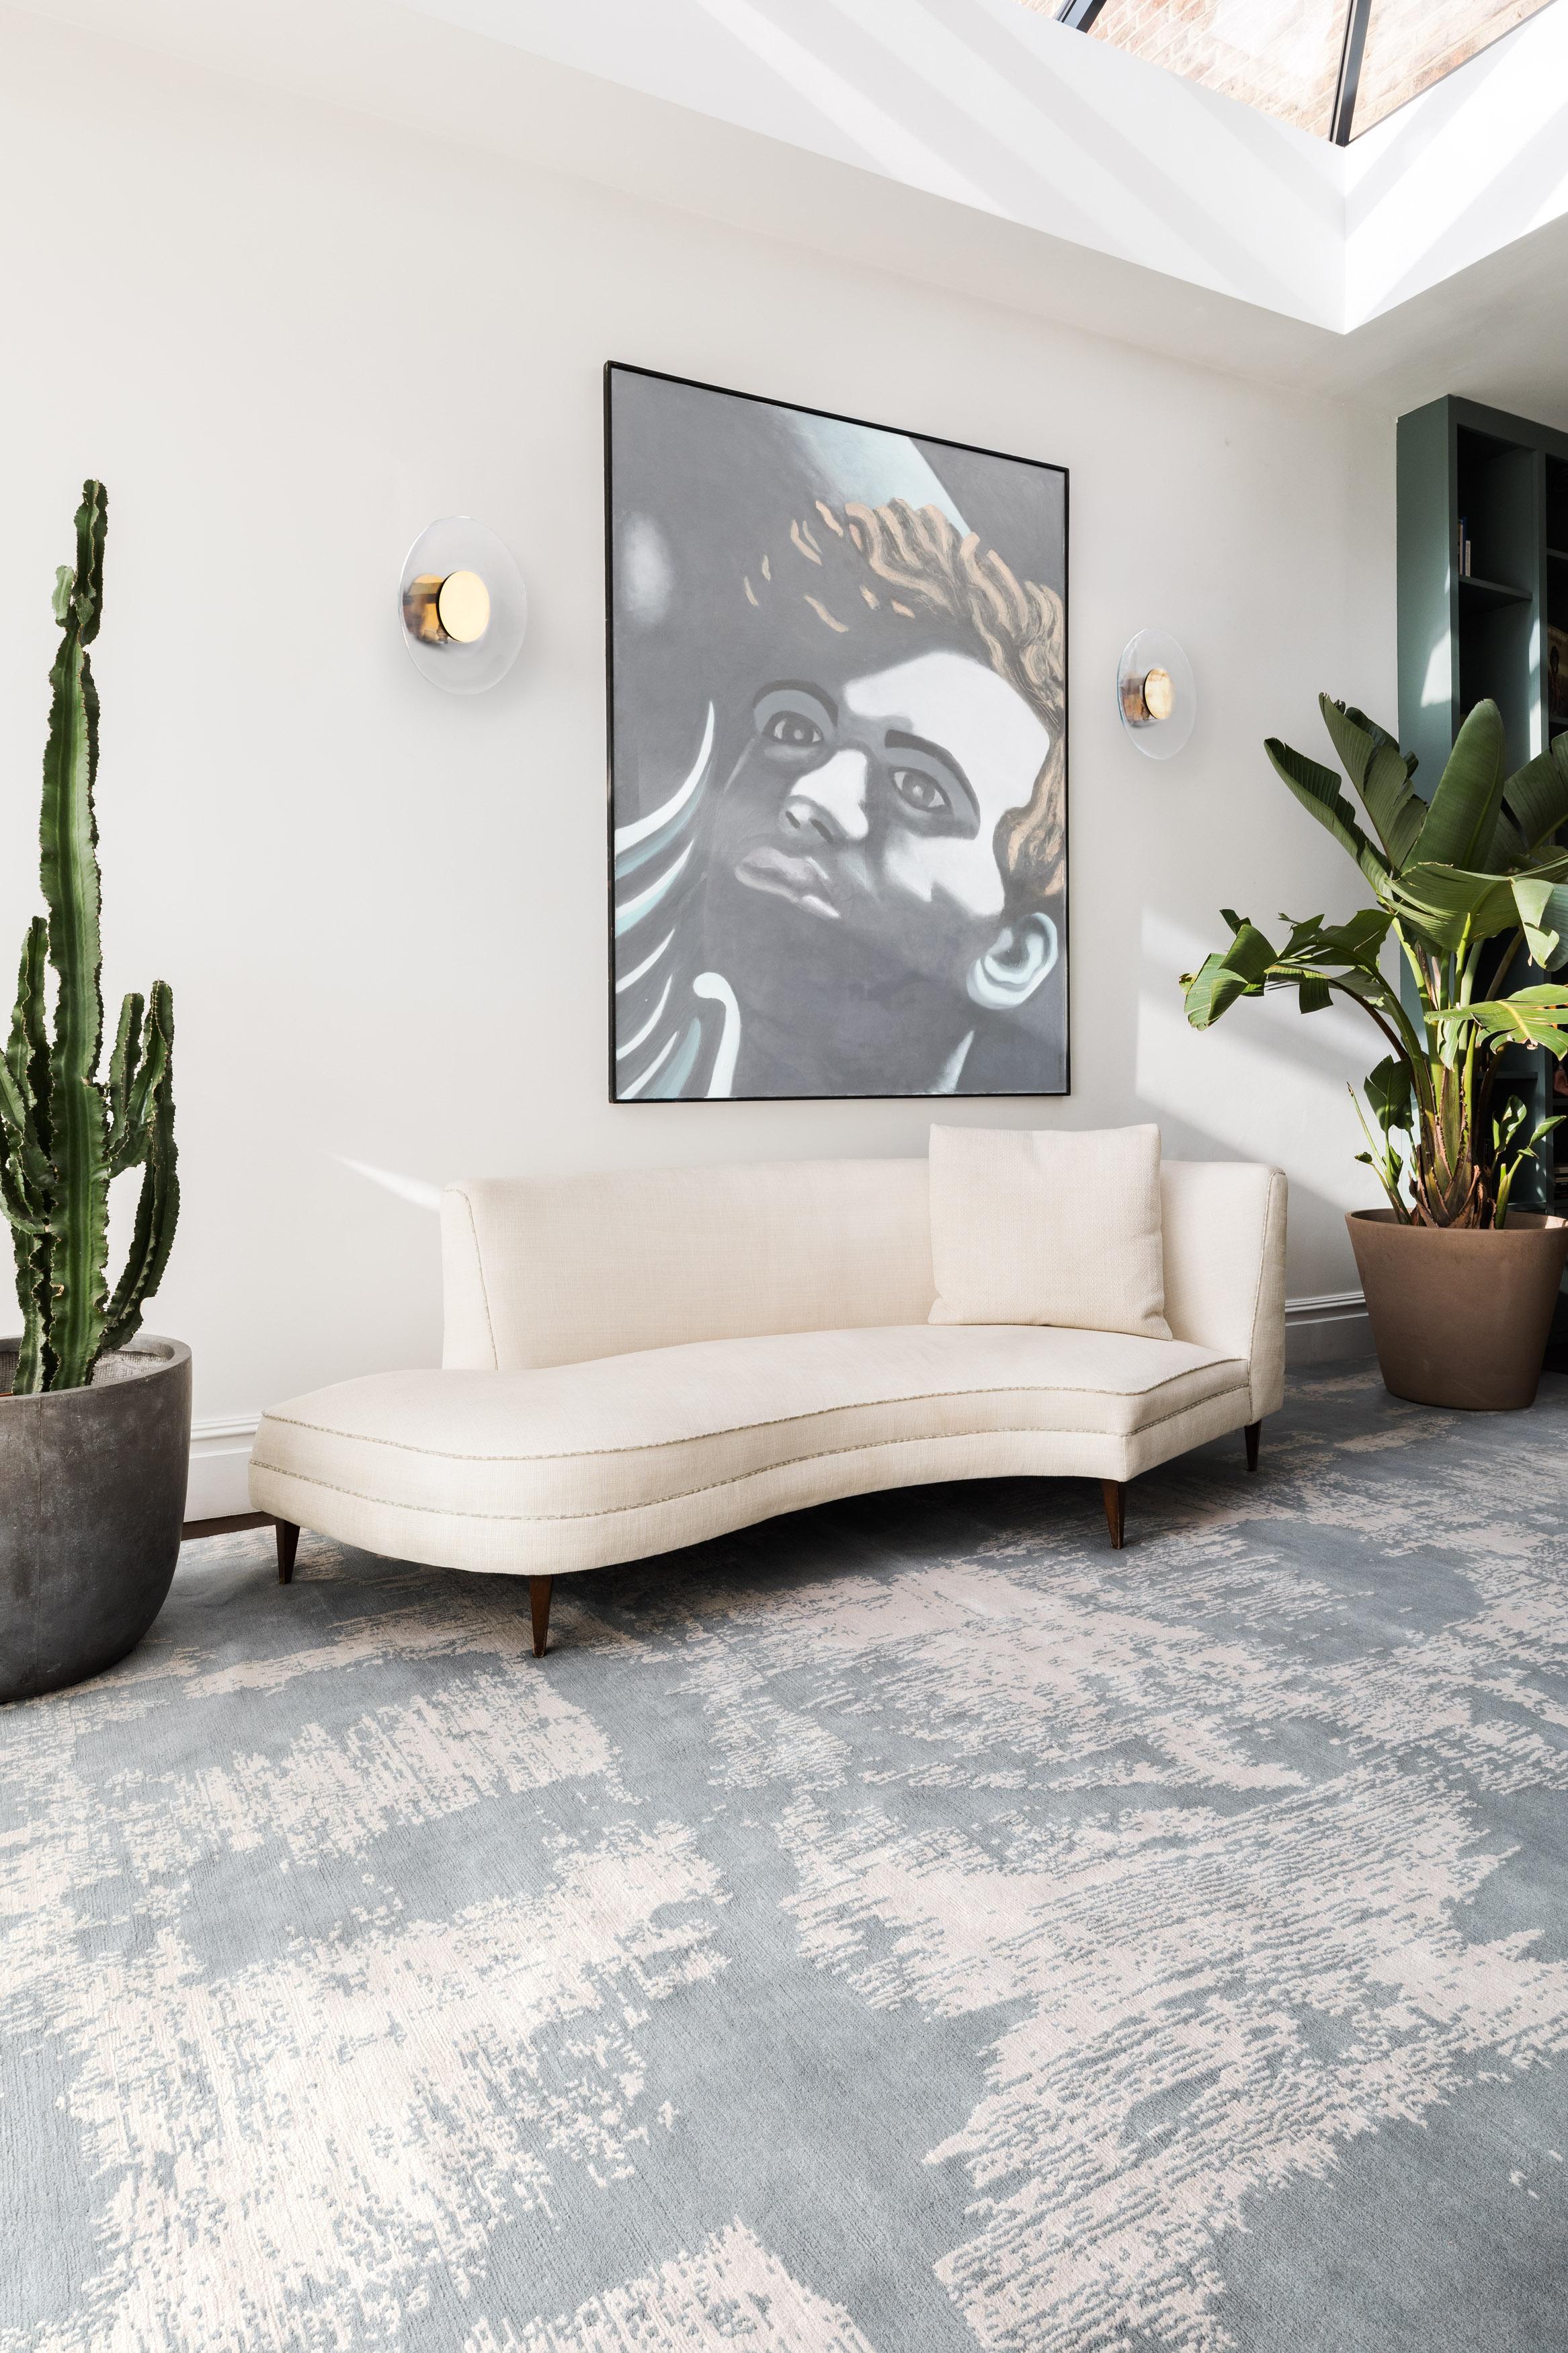 Named after the iconic Cedar Bar in New York where artists would often gather, this design depicts the raw emotion and expression found in the movement. Wide overlapping strokes feature in grey tones, crafted entirely in wool to highlight the